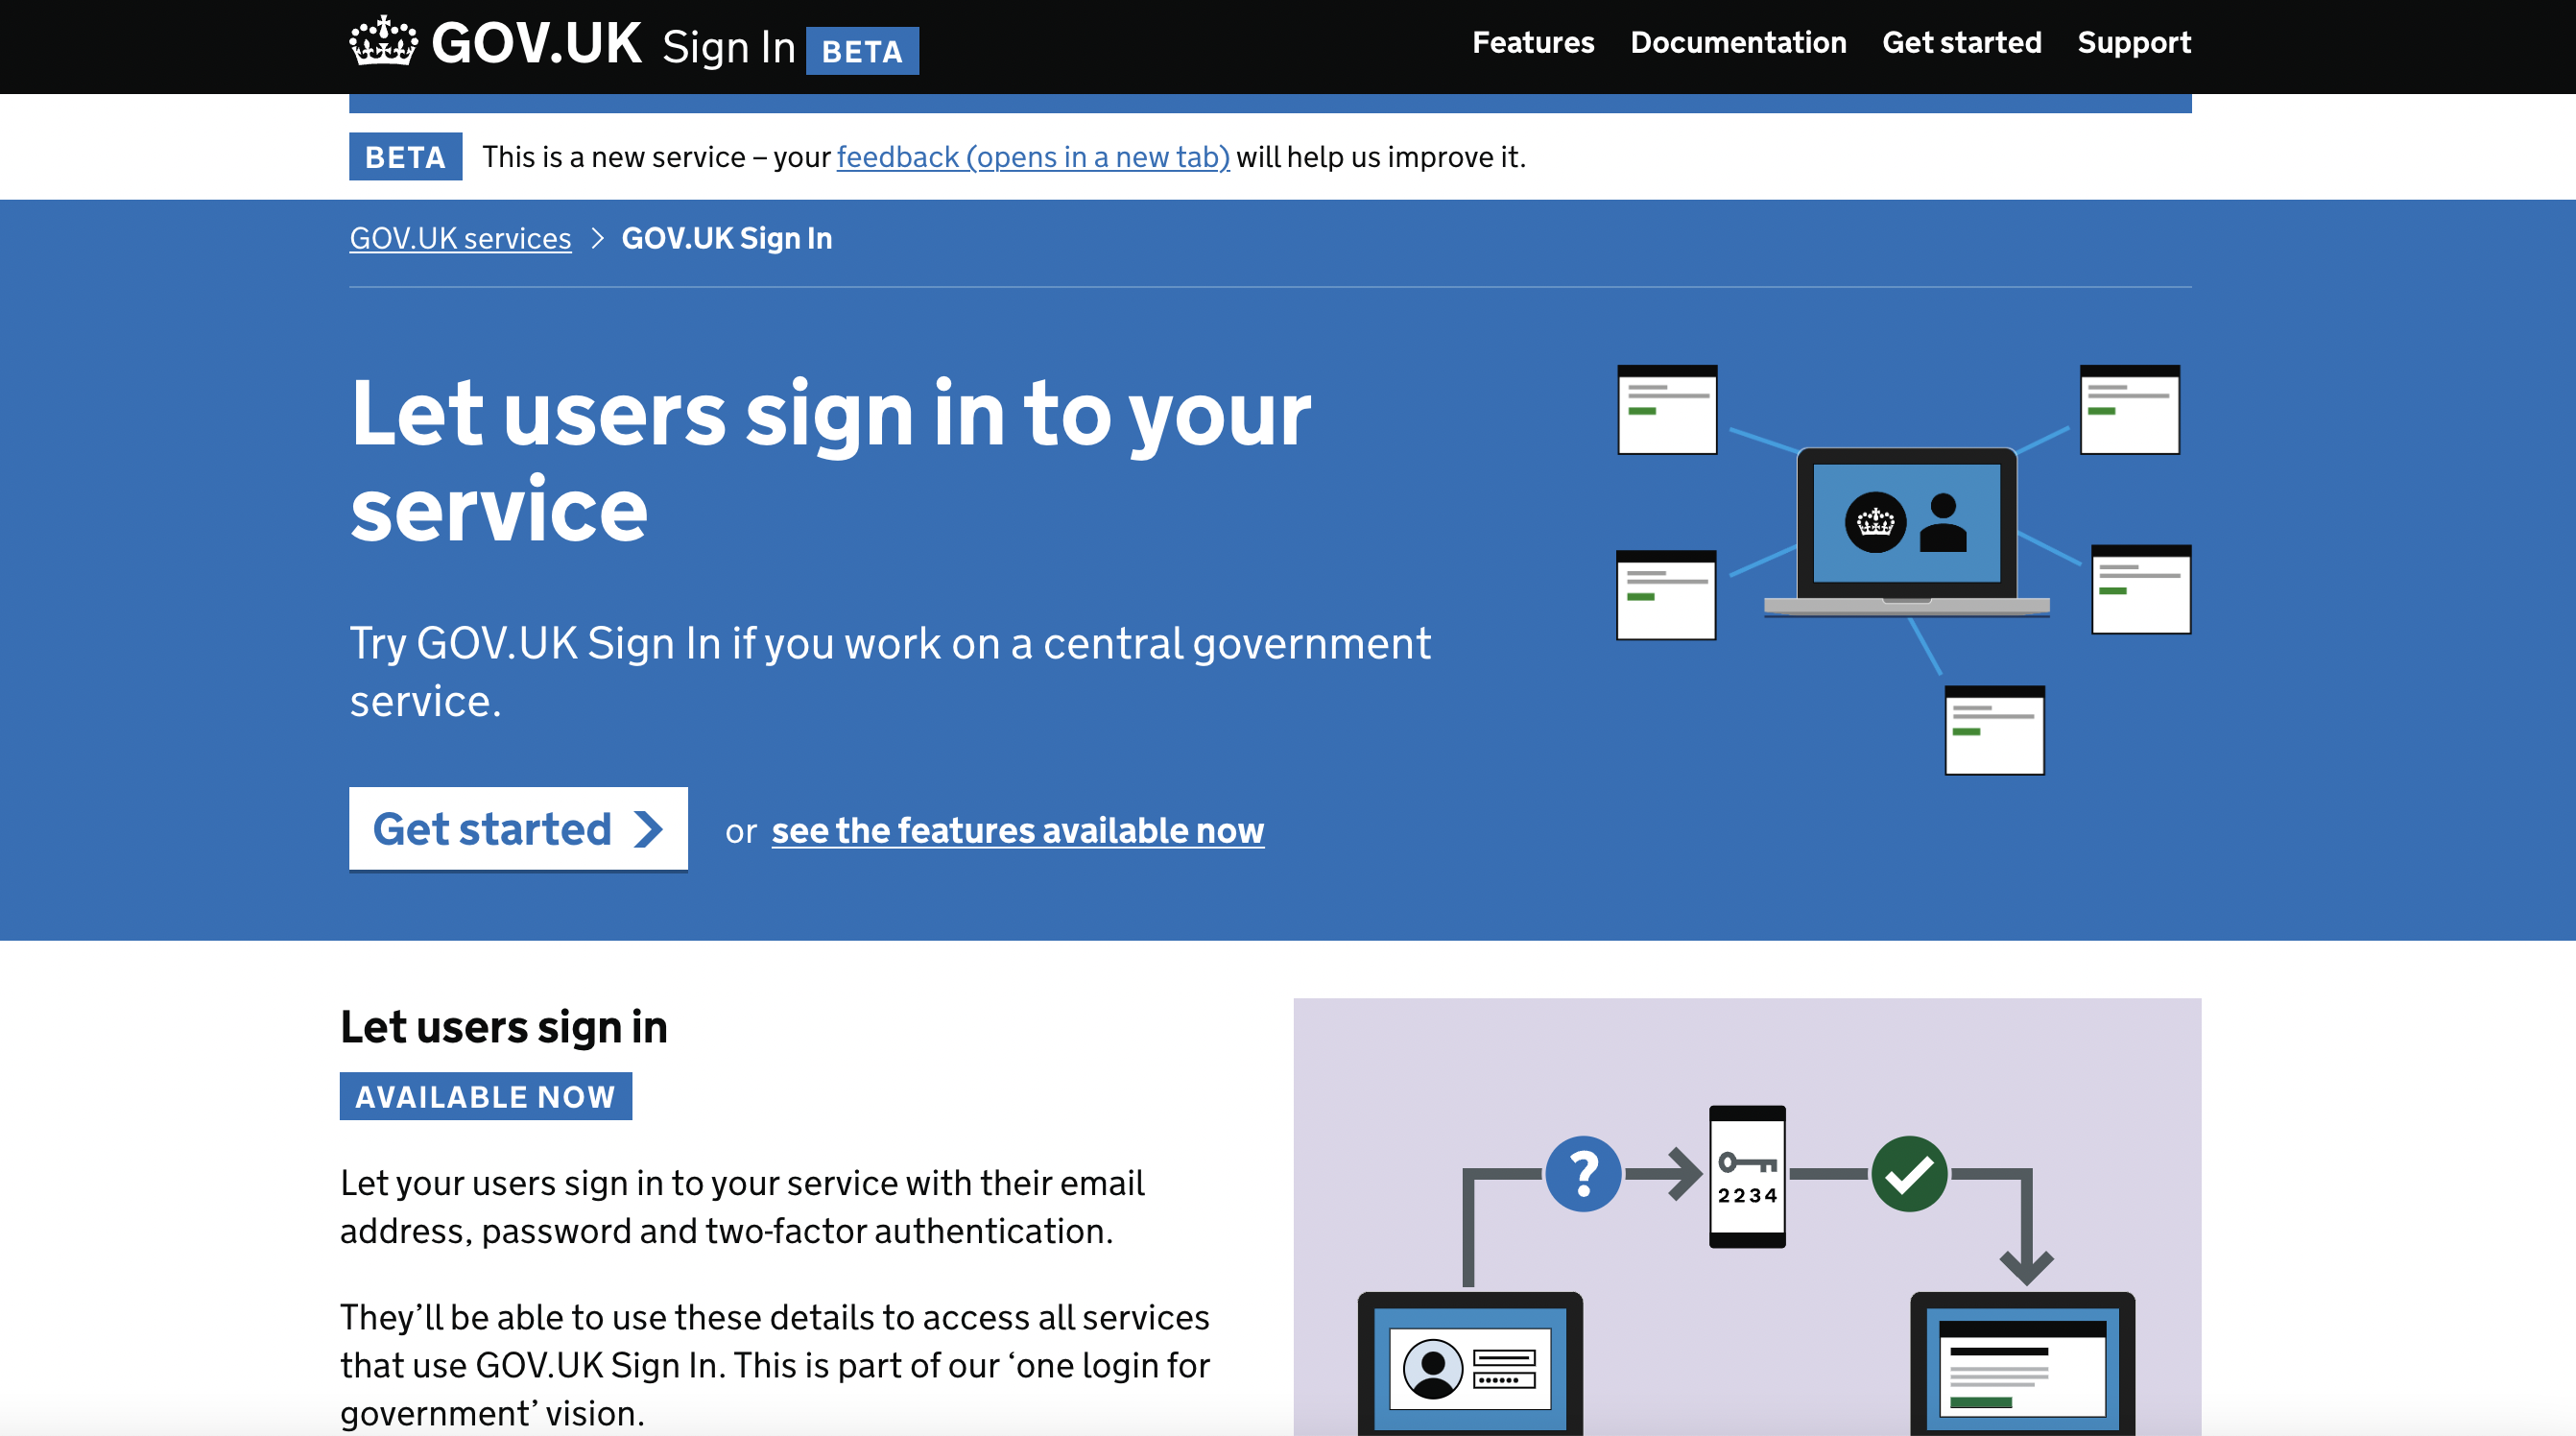 Screenshot of the homepage for the GOV.UK Sign in website